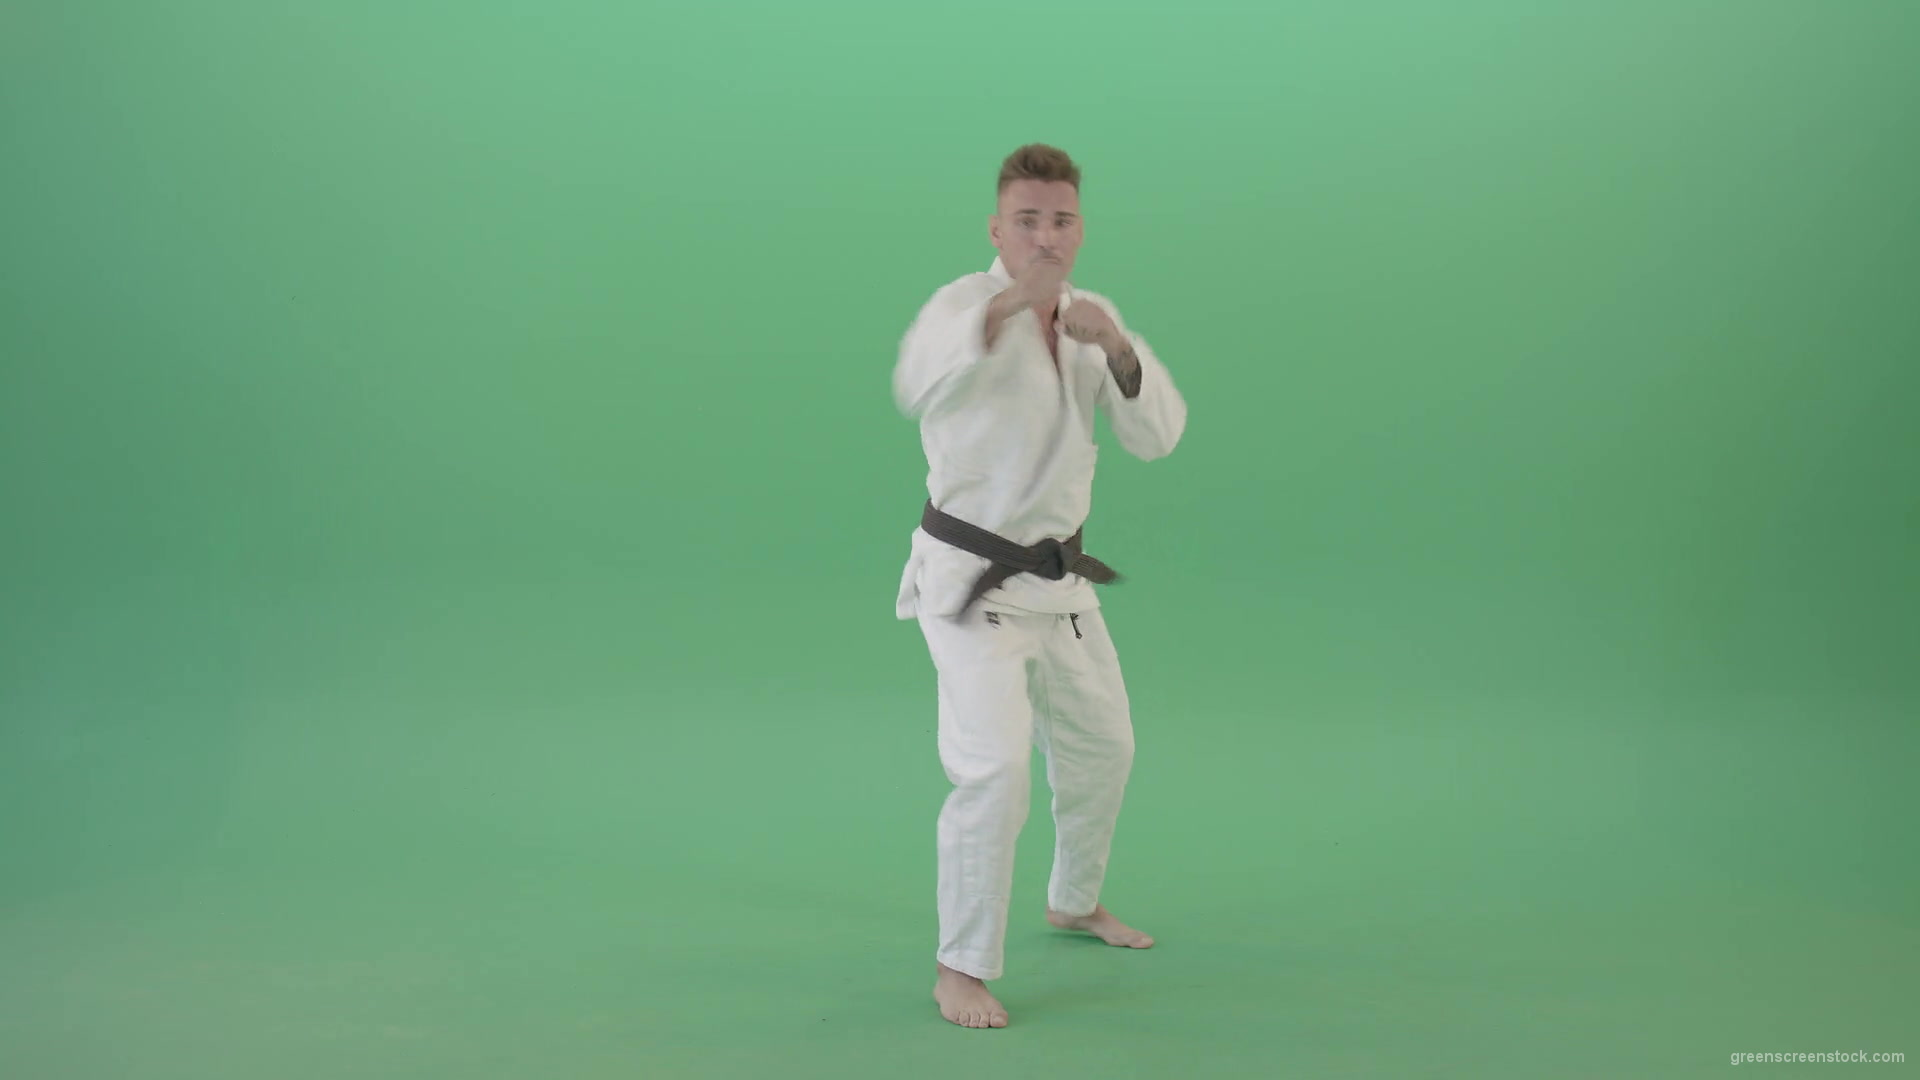 Karate-Man-boxing-making-punch-front-view-isolated-on-green-screen-1920_004 Green Screen Stock